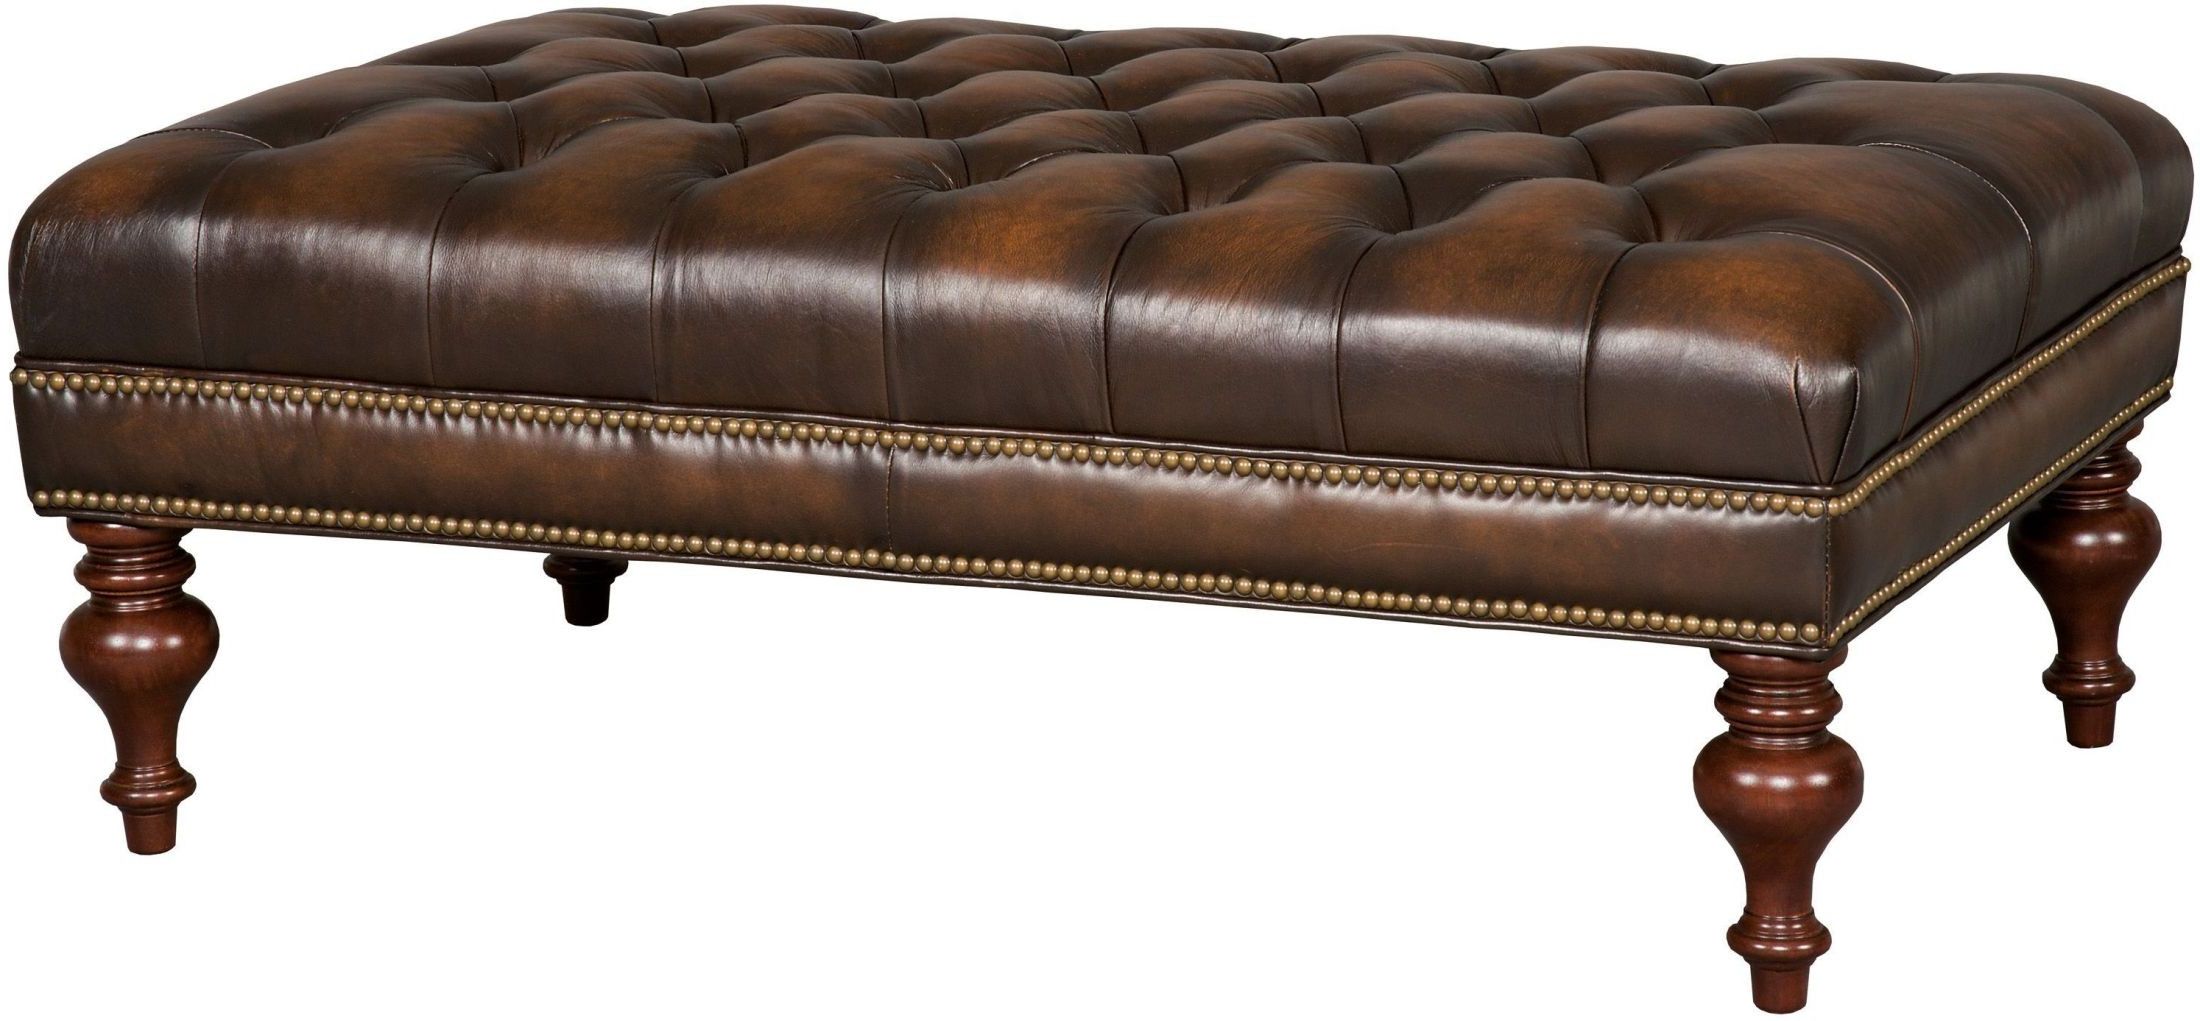 Kingley Brown Tufted Cocktail Leather Ottoman From Hooker (View 10 of 10)